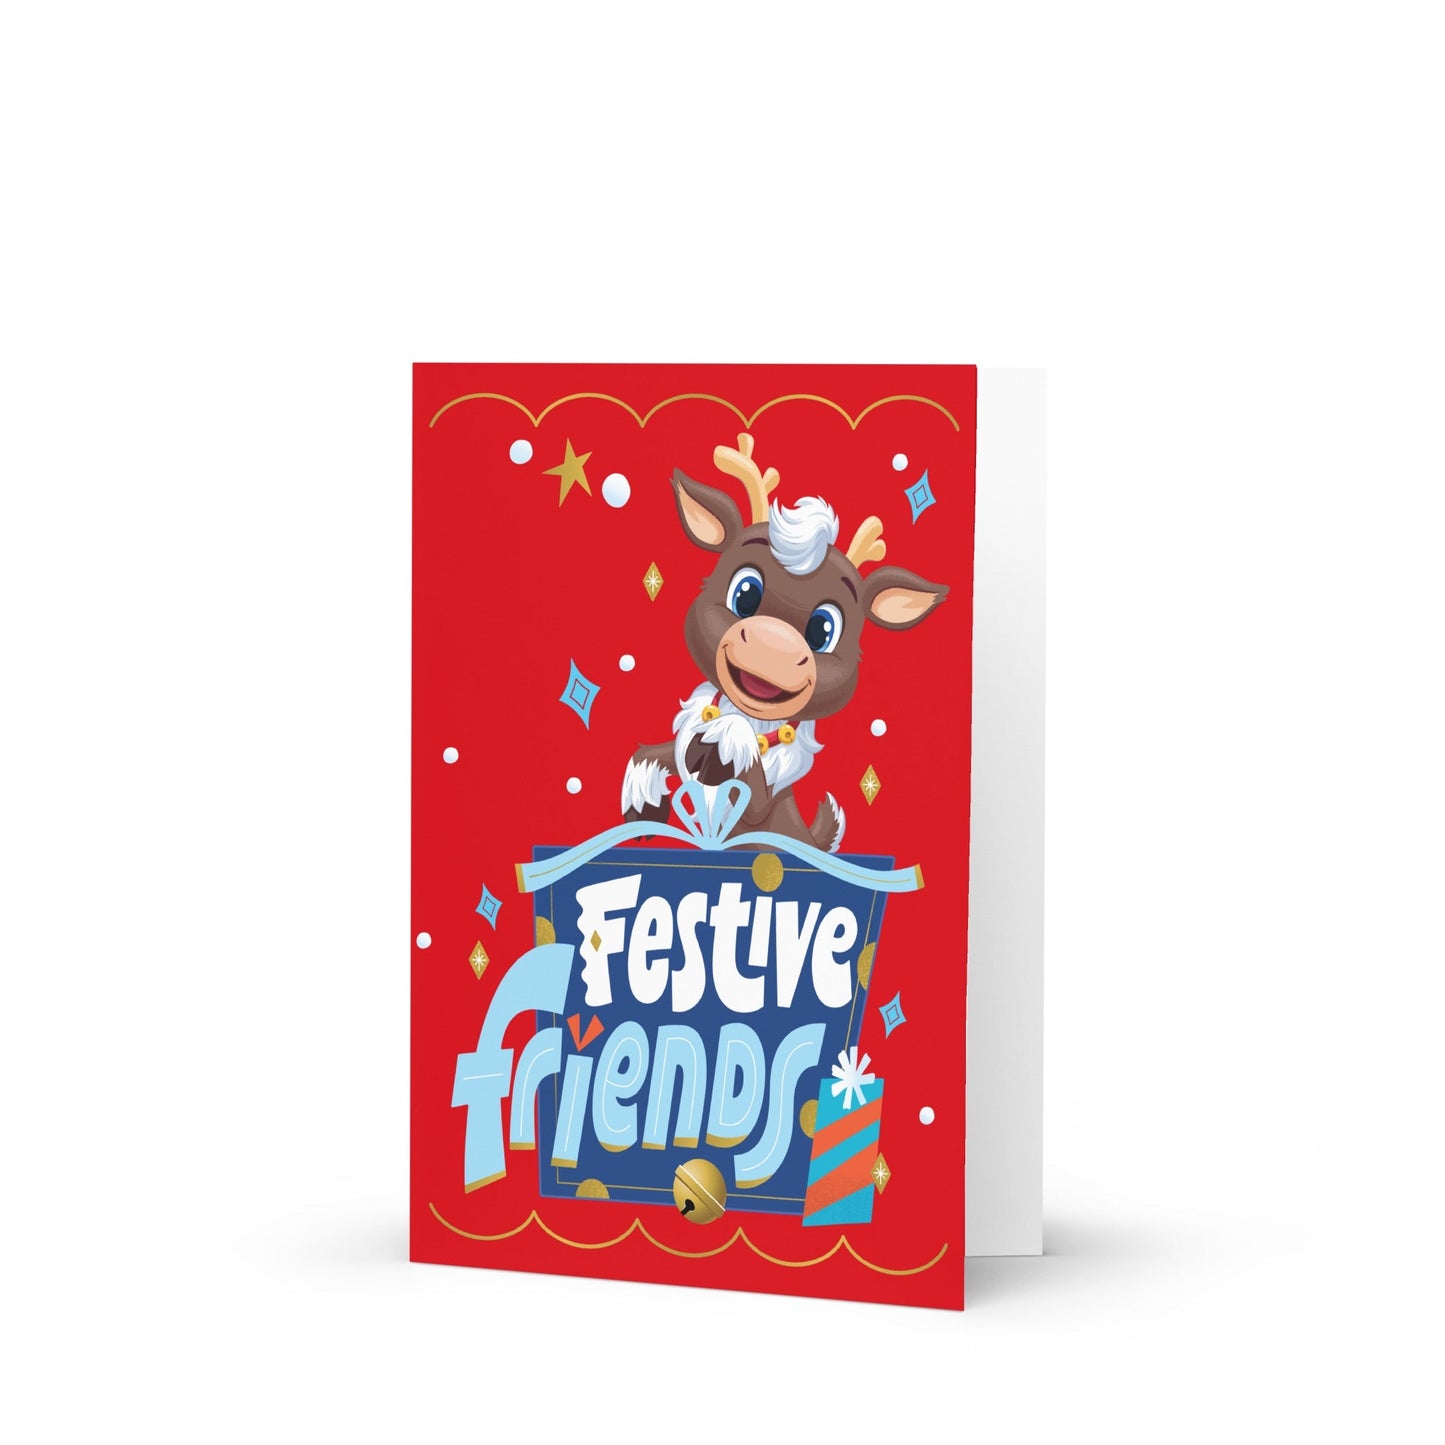 Reindeer in Here Festive Friends Holiday Card - Paramount Shop